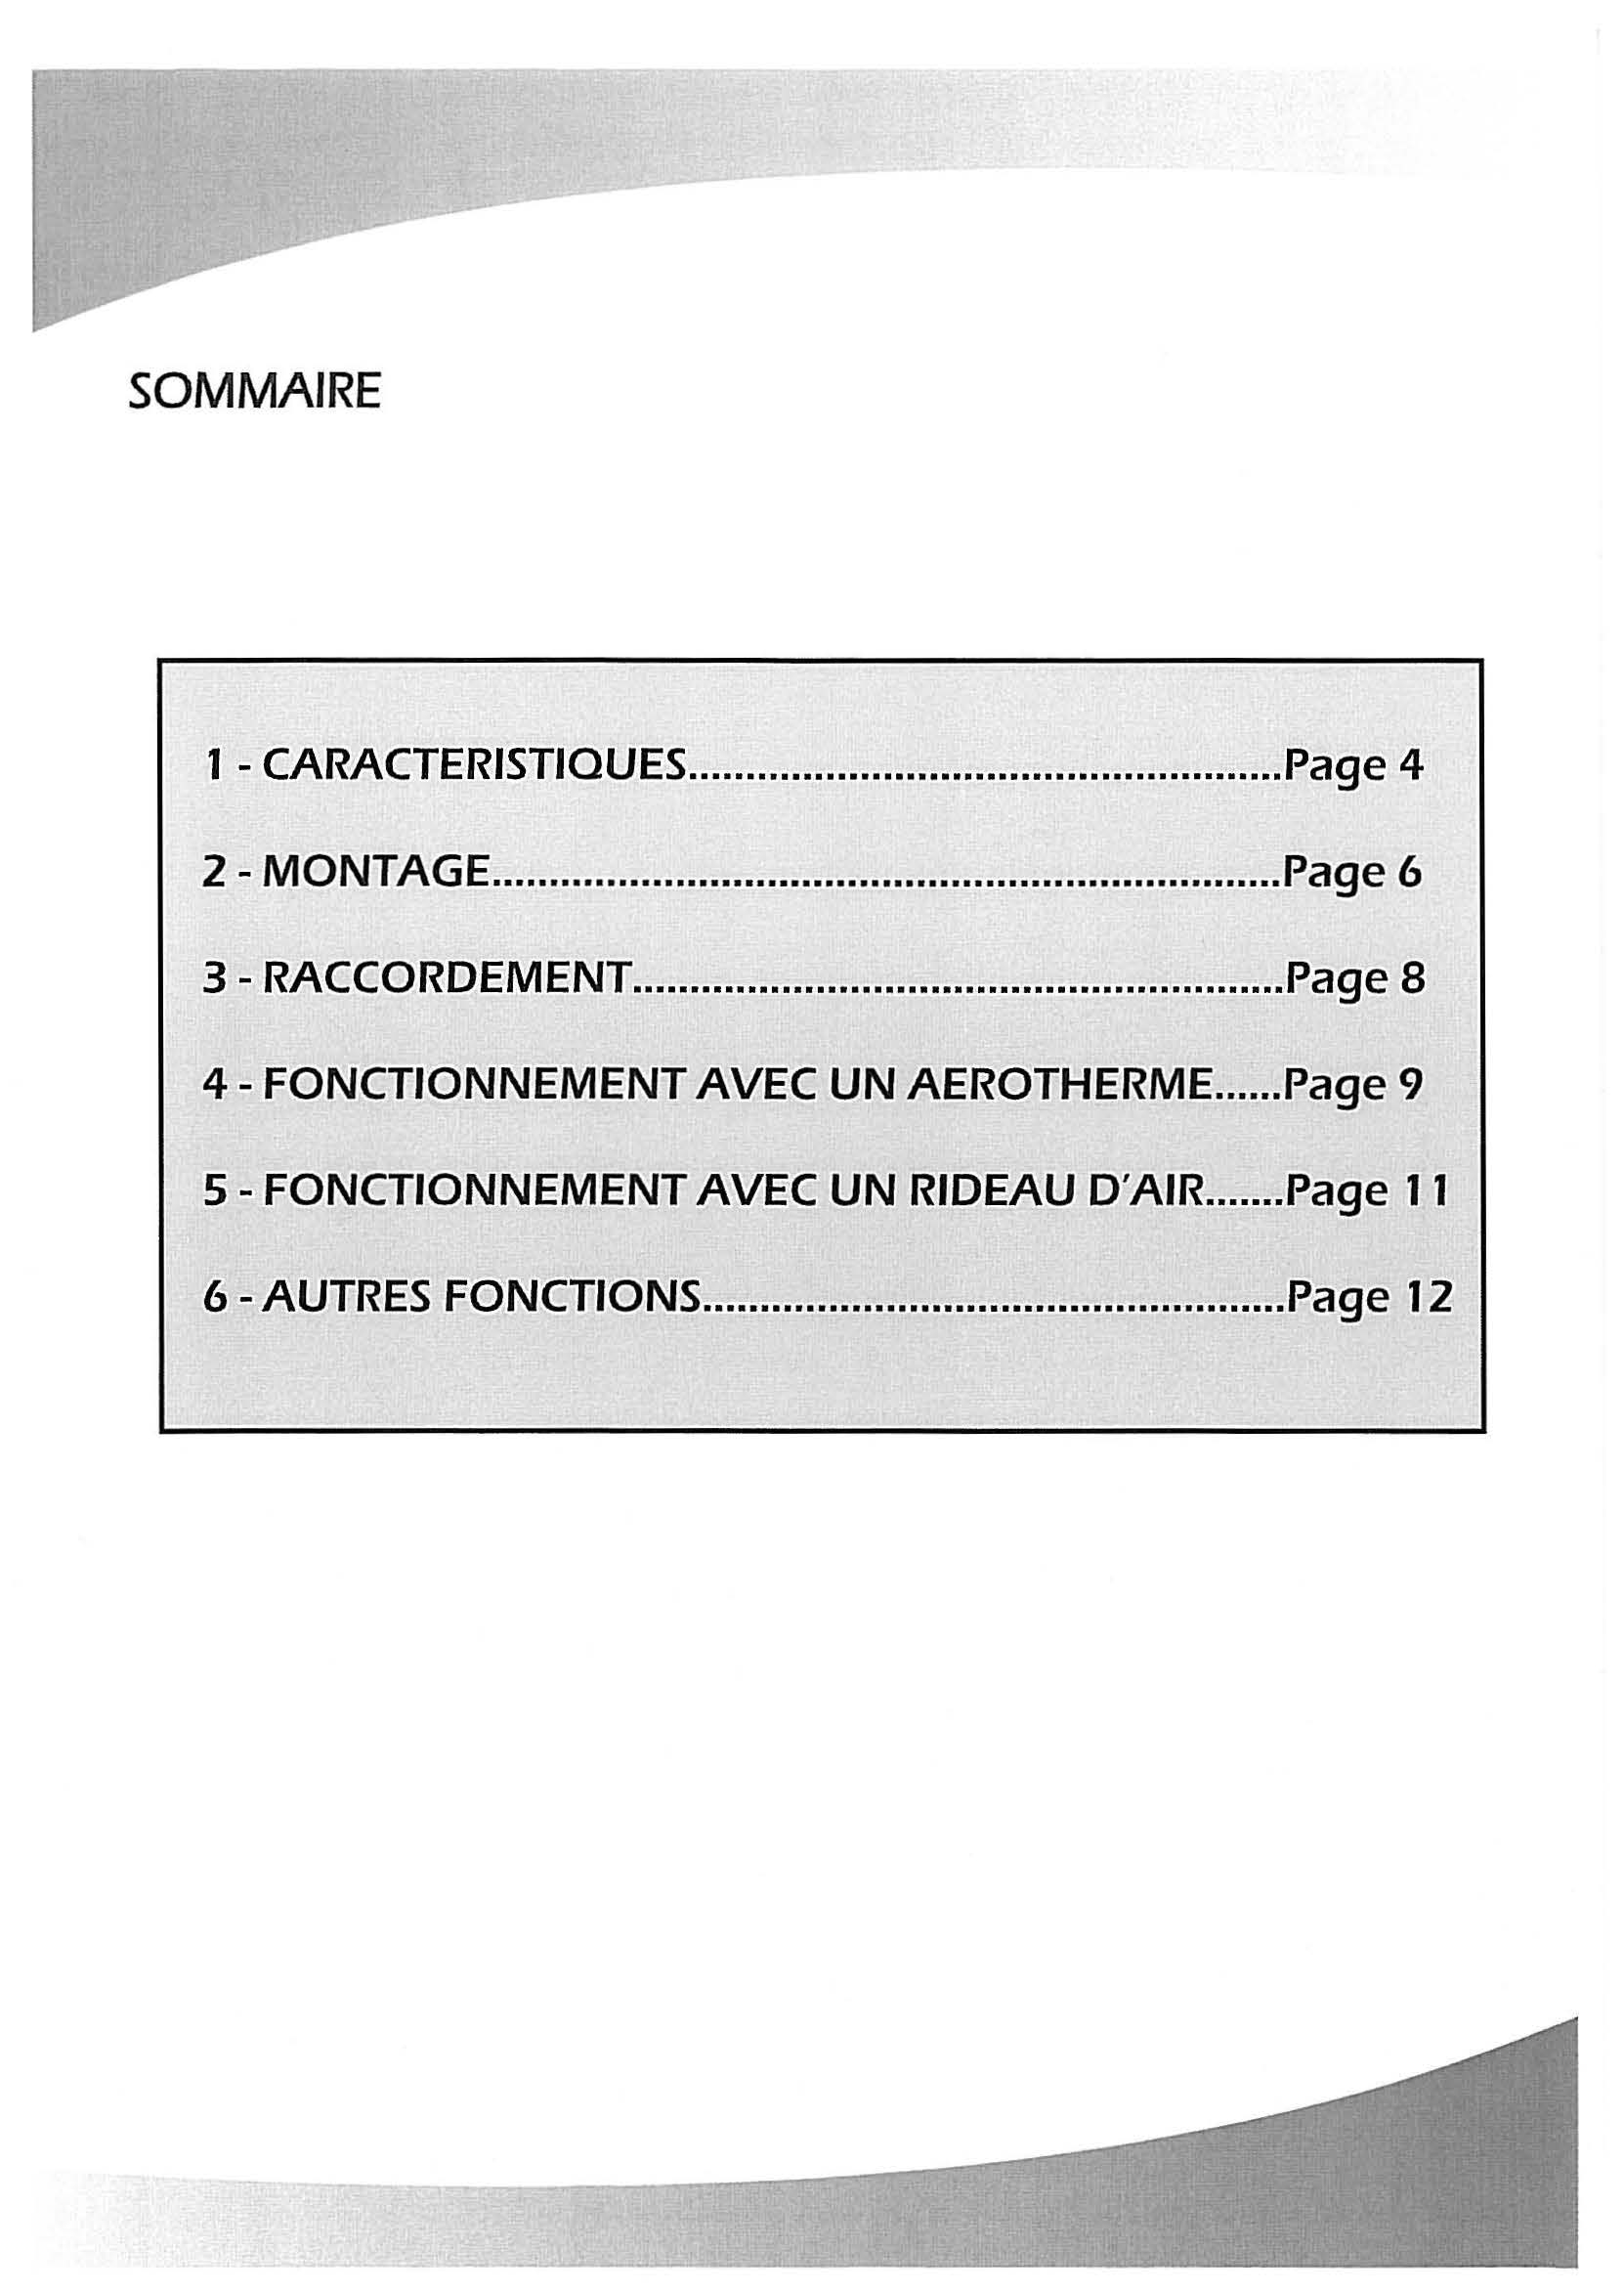 SOMMAIRE 1 - CARACTERISTIOUES... Page 4 2 - MONTAGE... Page 6 3 - RAC 0RIDEMENT.